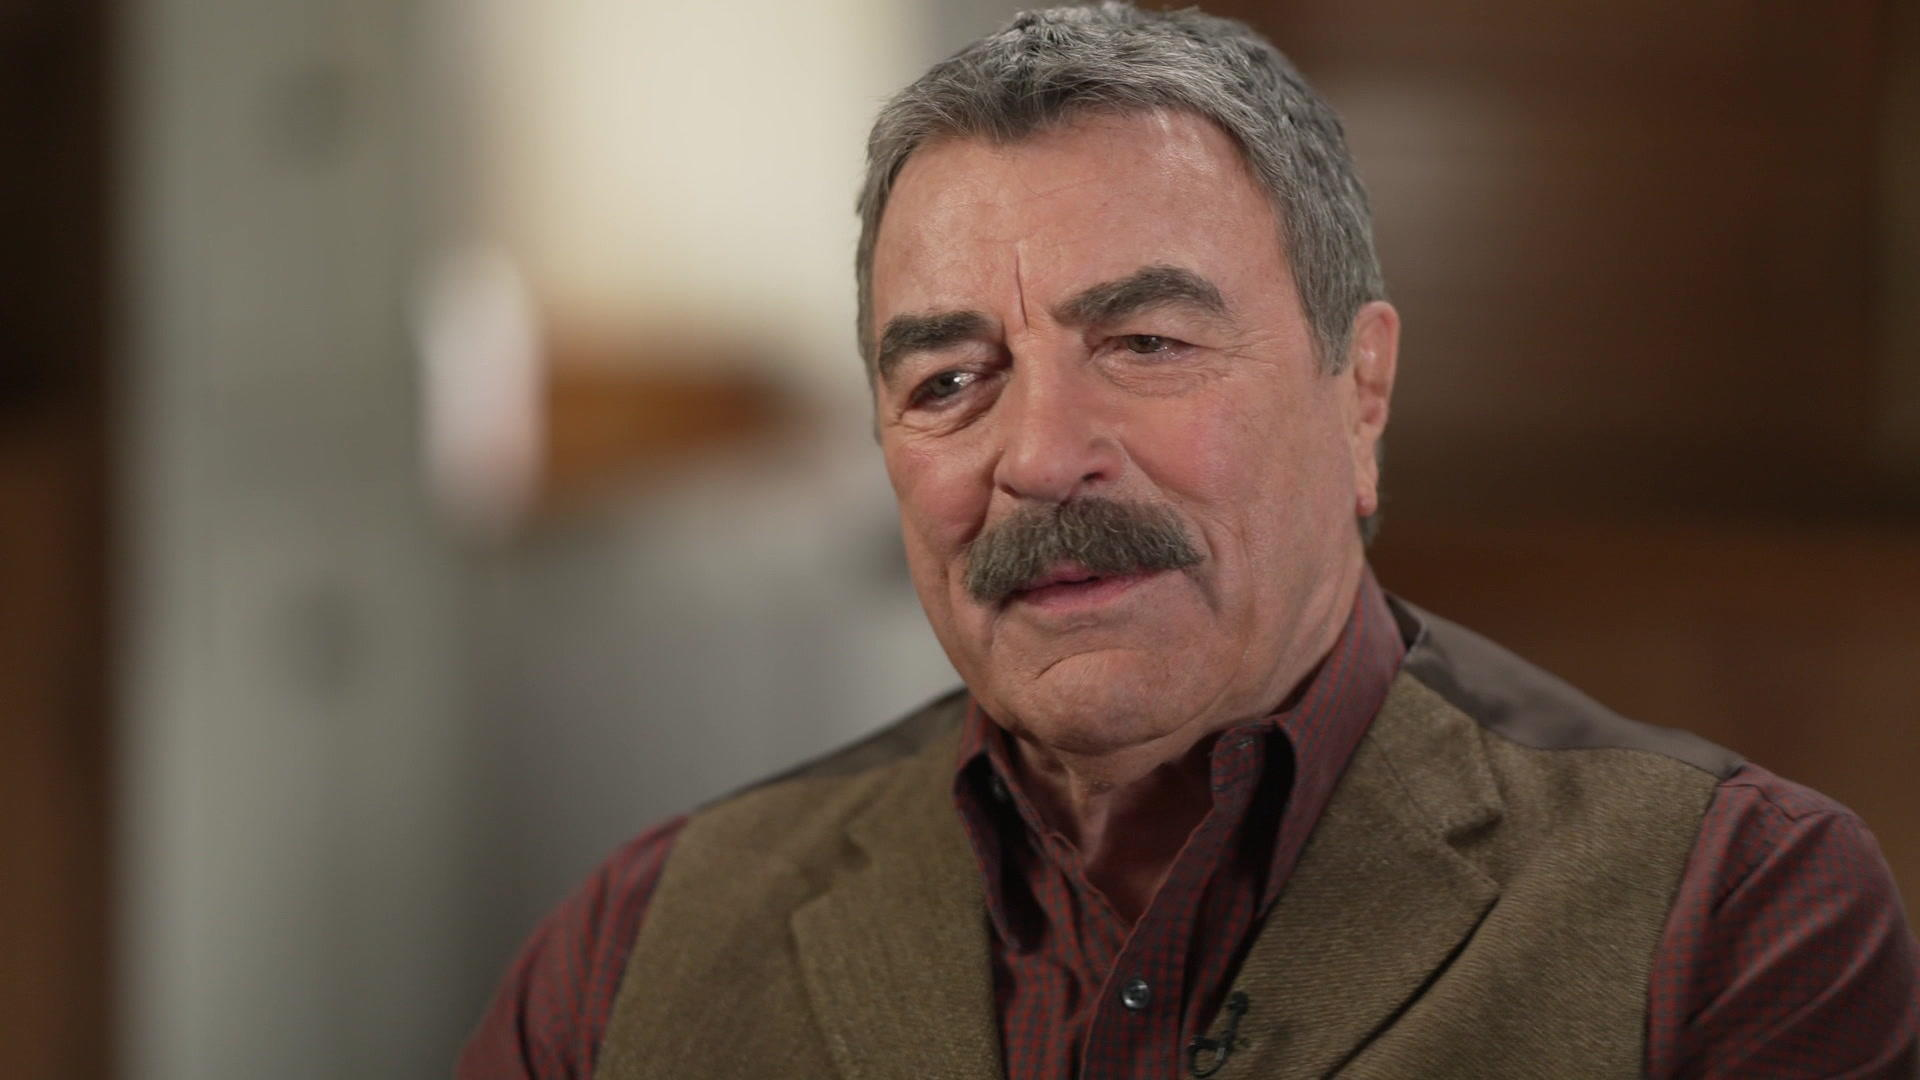 Watch Sunday Morning: Tom Selleck on "Blue Bloods" and his memoir, "You  Never Know" - Full show on CBS